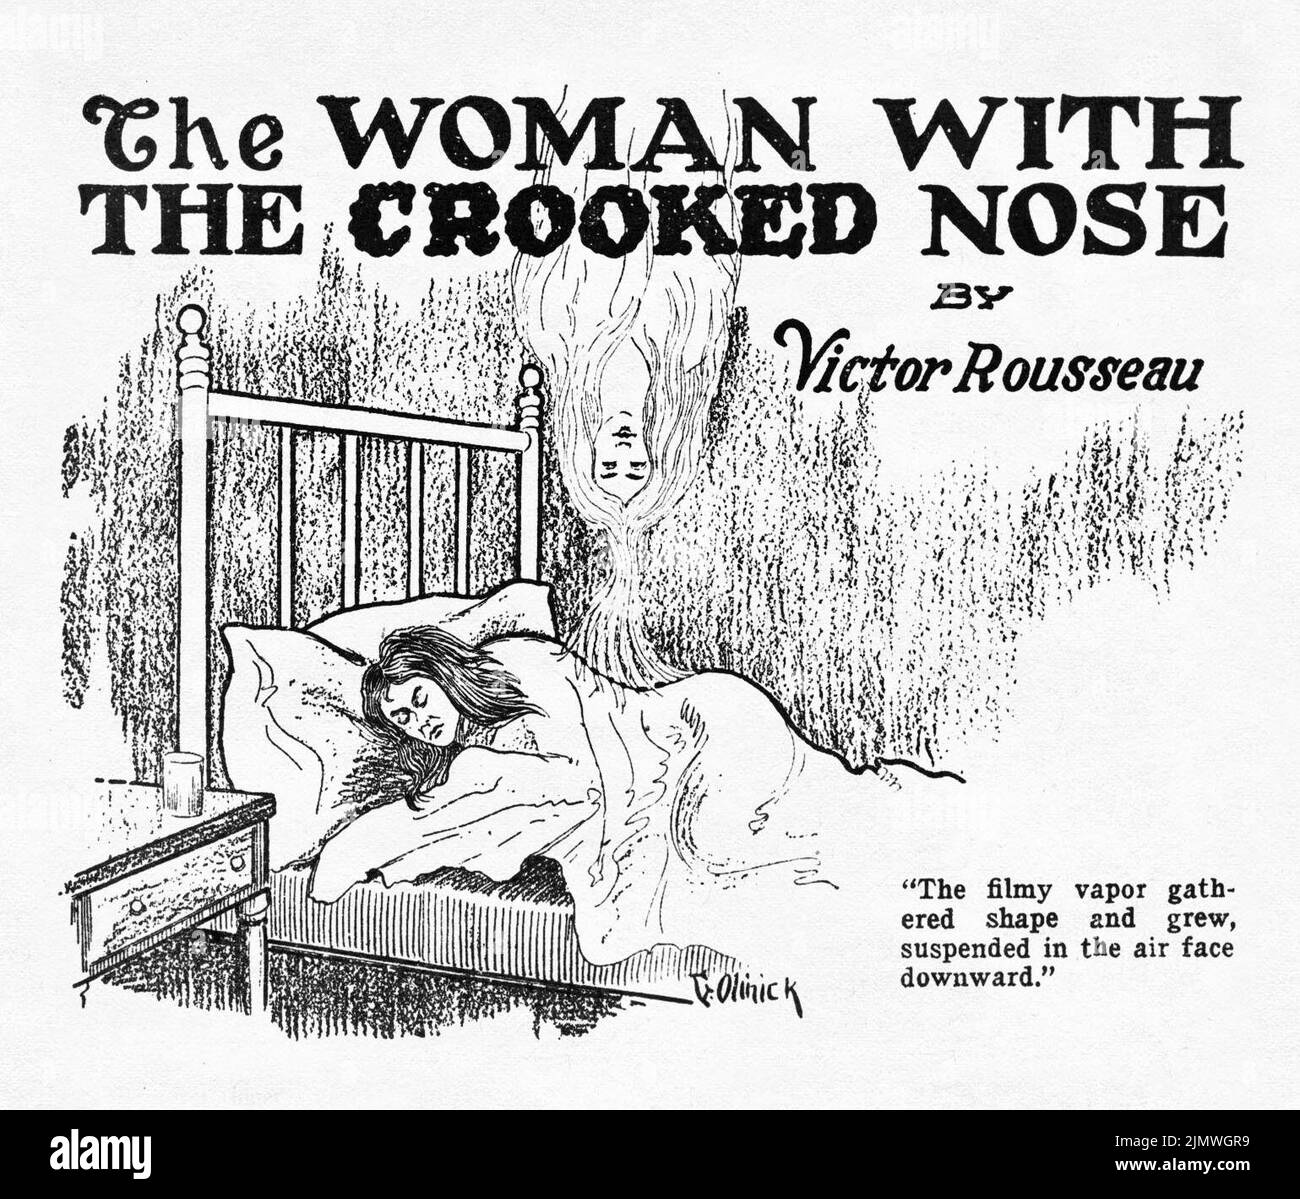 The Woman with the Crooked Nose, by Victor Rousseau. Illustration by G. O. Olinick from Weird Tales, October 1926 Stock Photo